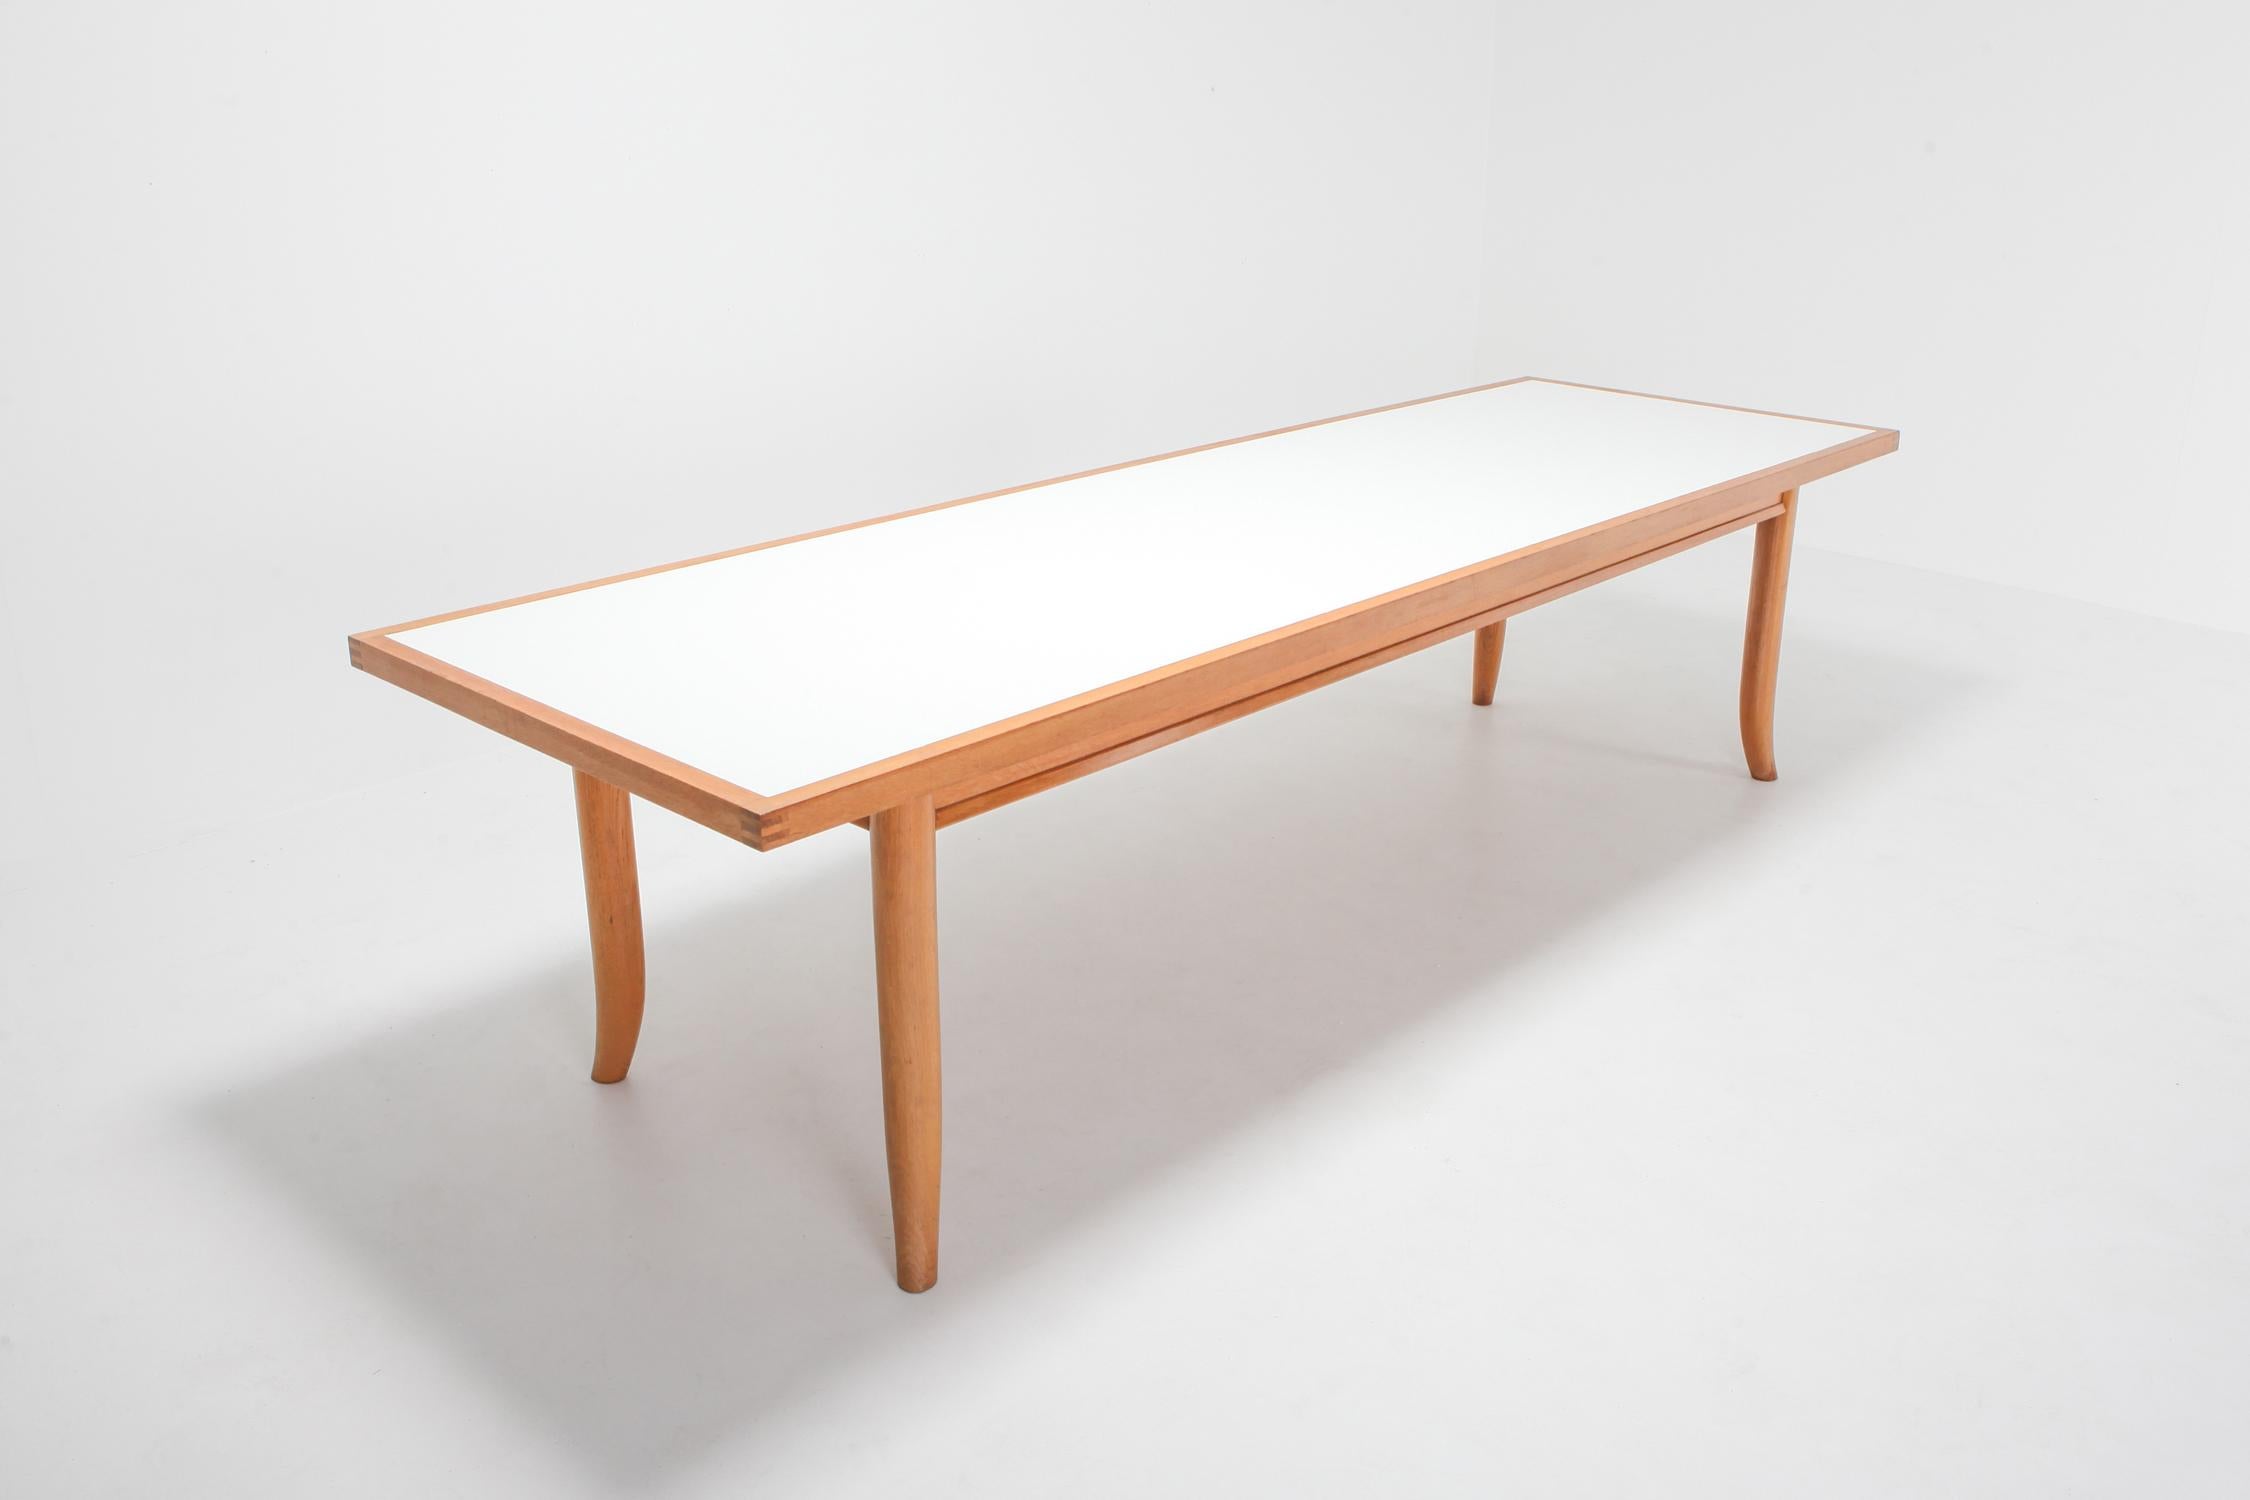 North American American Modern Oak Dining Table with Saber Legs Made in Japan